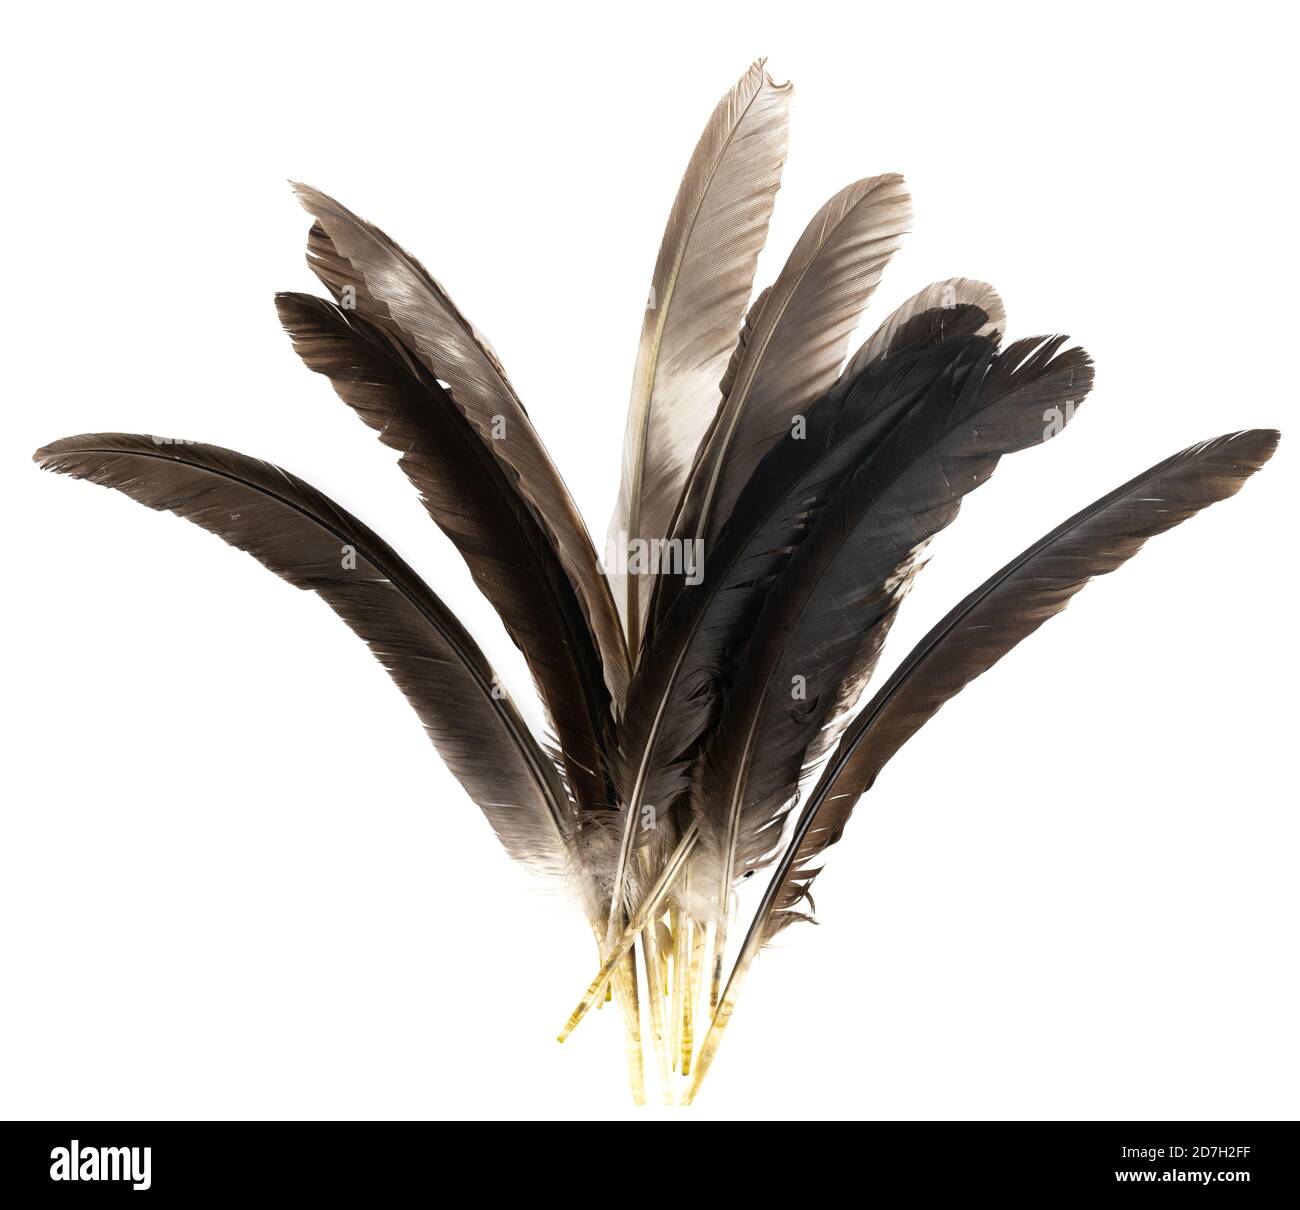 Natural bird feathers isolated on a white background. pile pigeon, chicken  and goose feathers close-up. stack bird feathers Stock Photo - Alamy